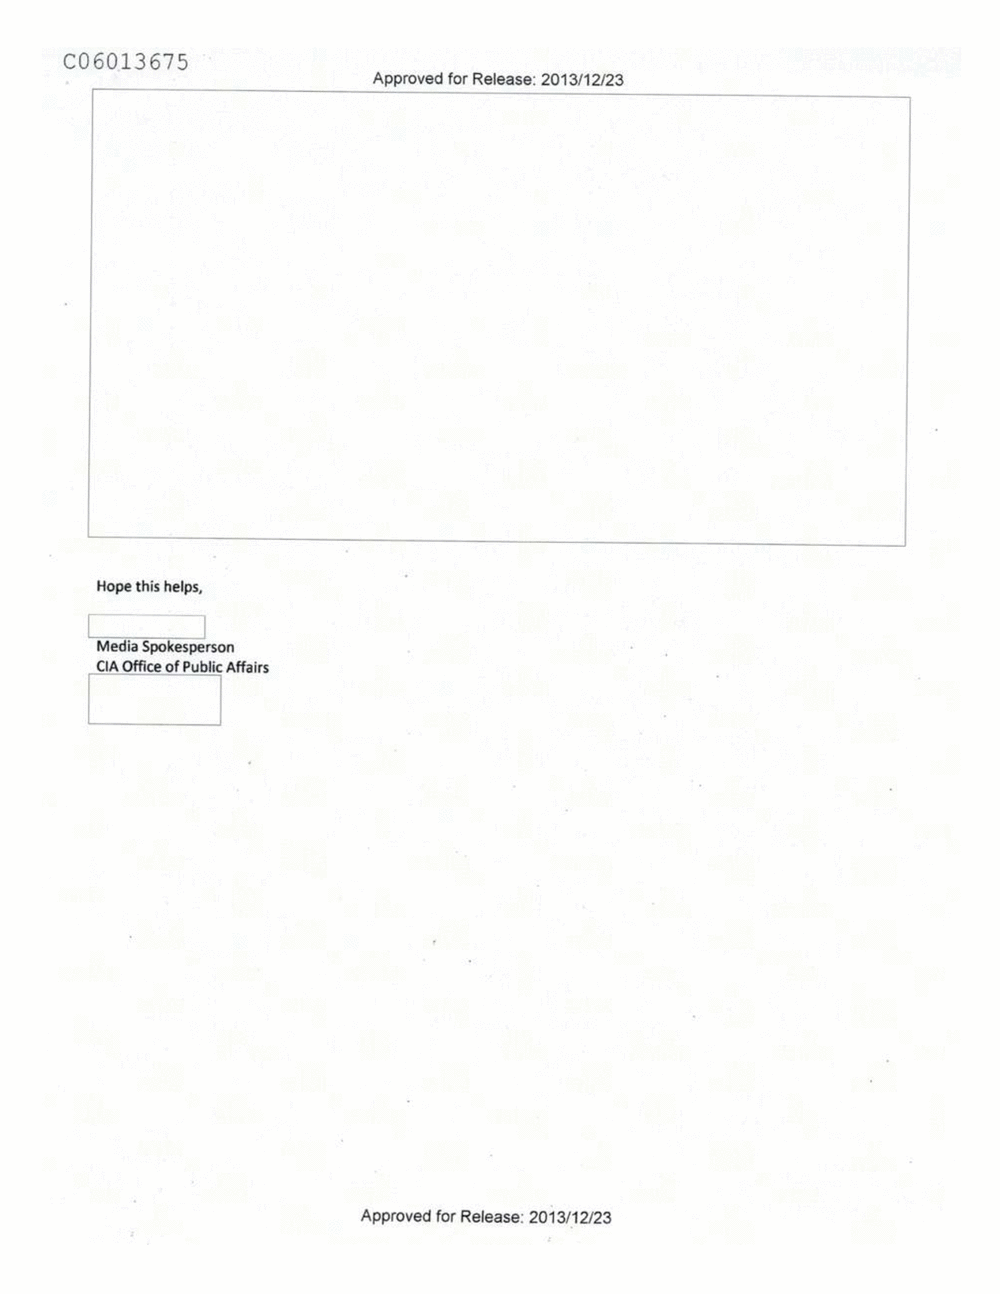 Page 529 from Email Correspondence Between Reporters and CIA Flacks